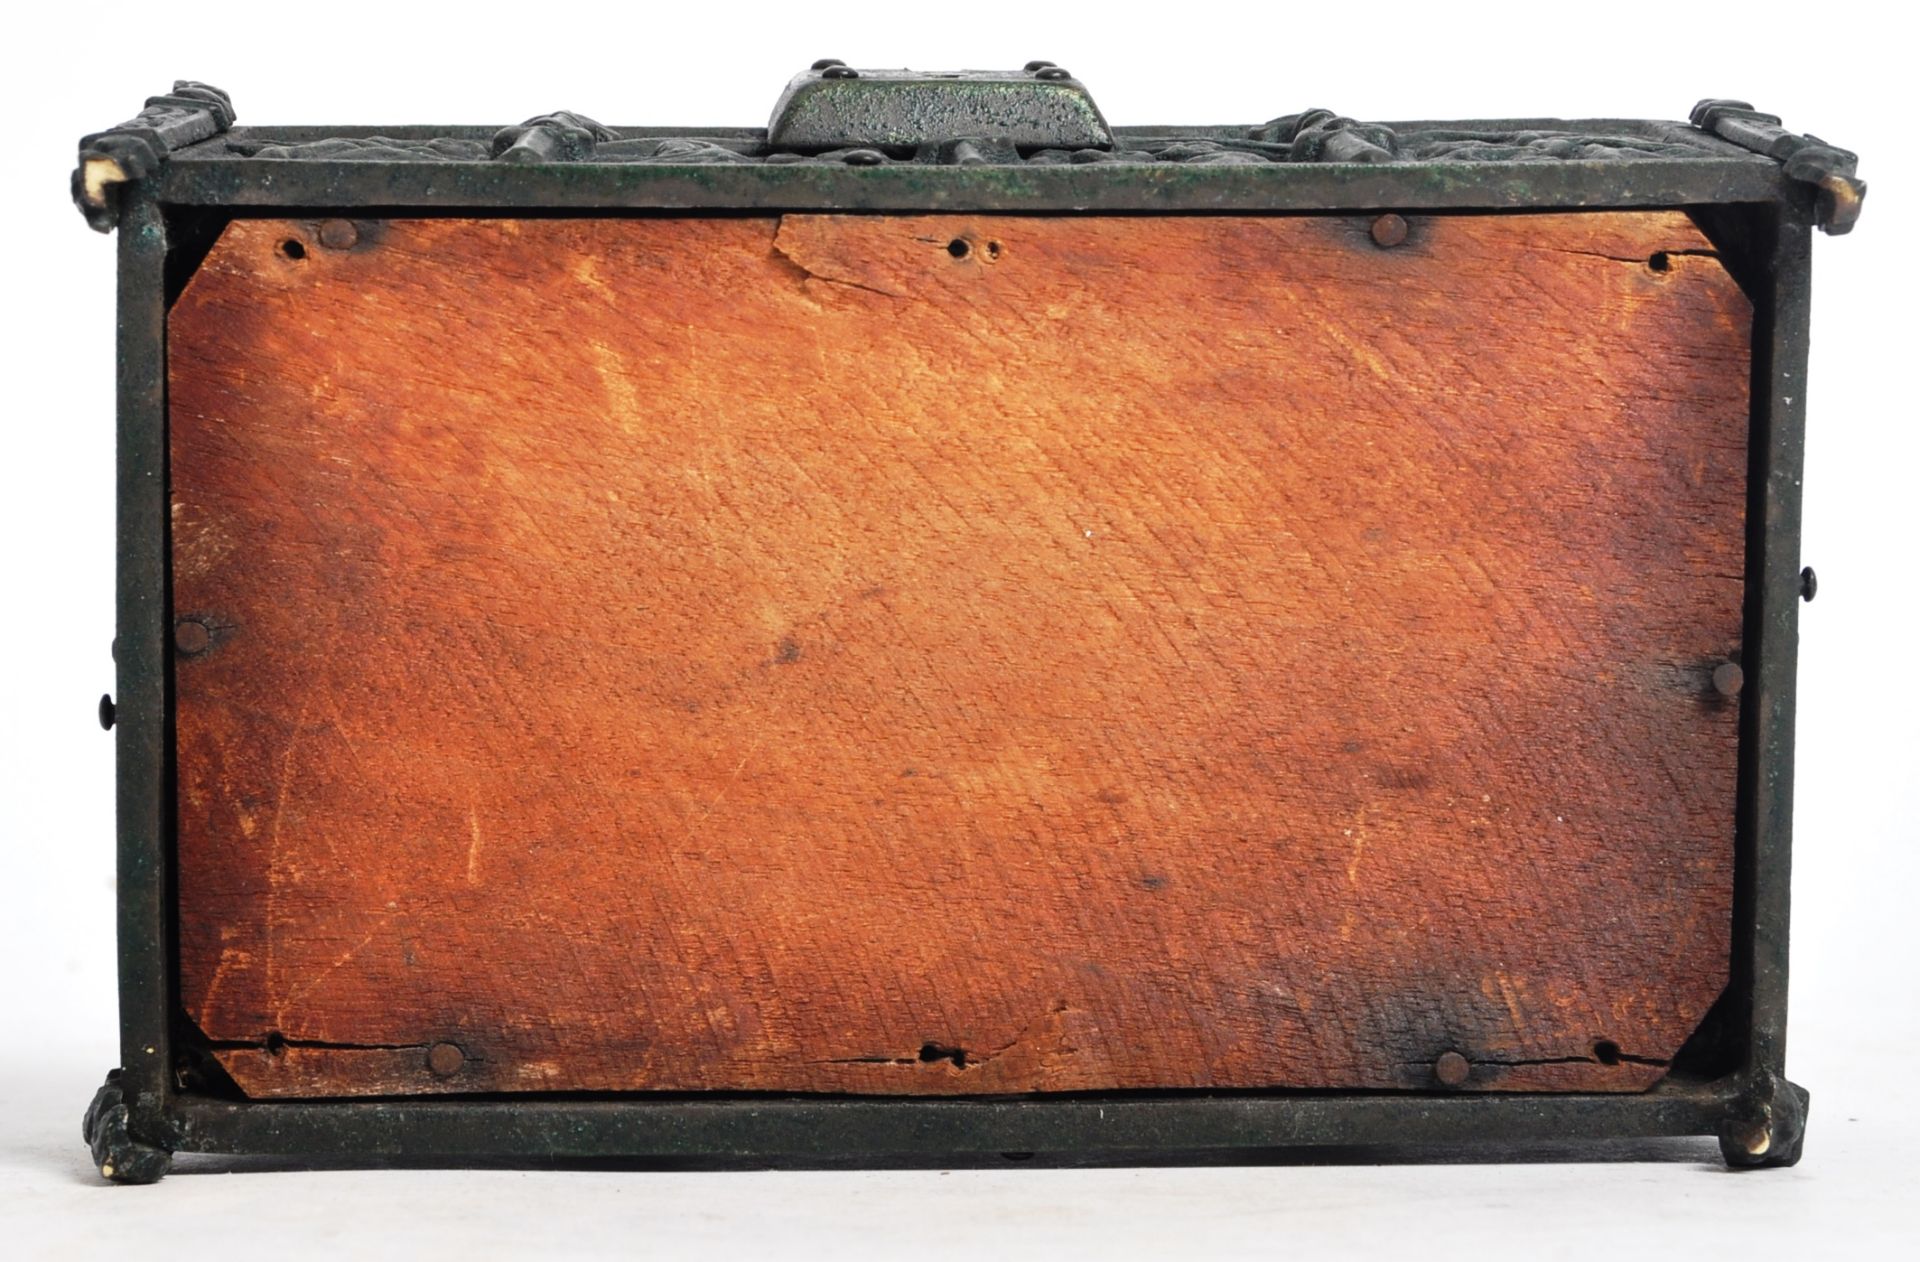 SMALL NINETEENTH CENTURY BRONZE CASKET WITH GOTHIC INLAY - Image 7 of 7